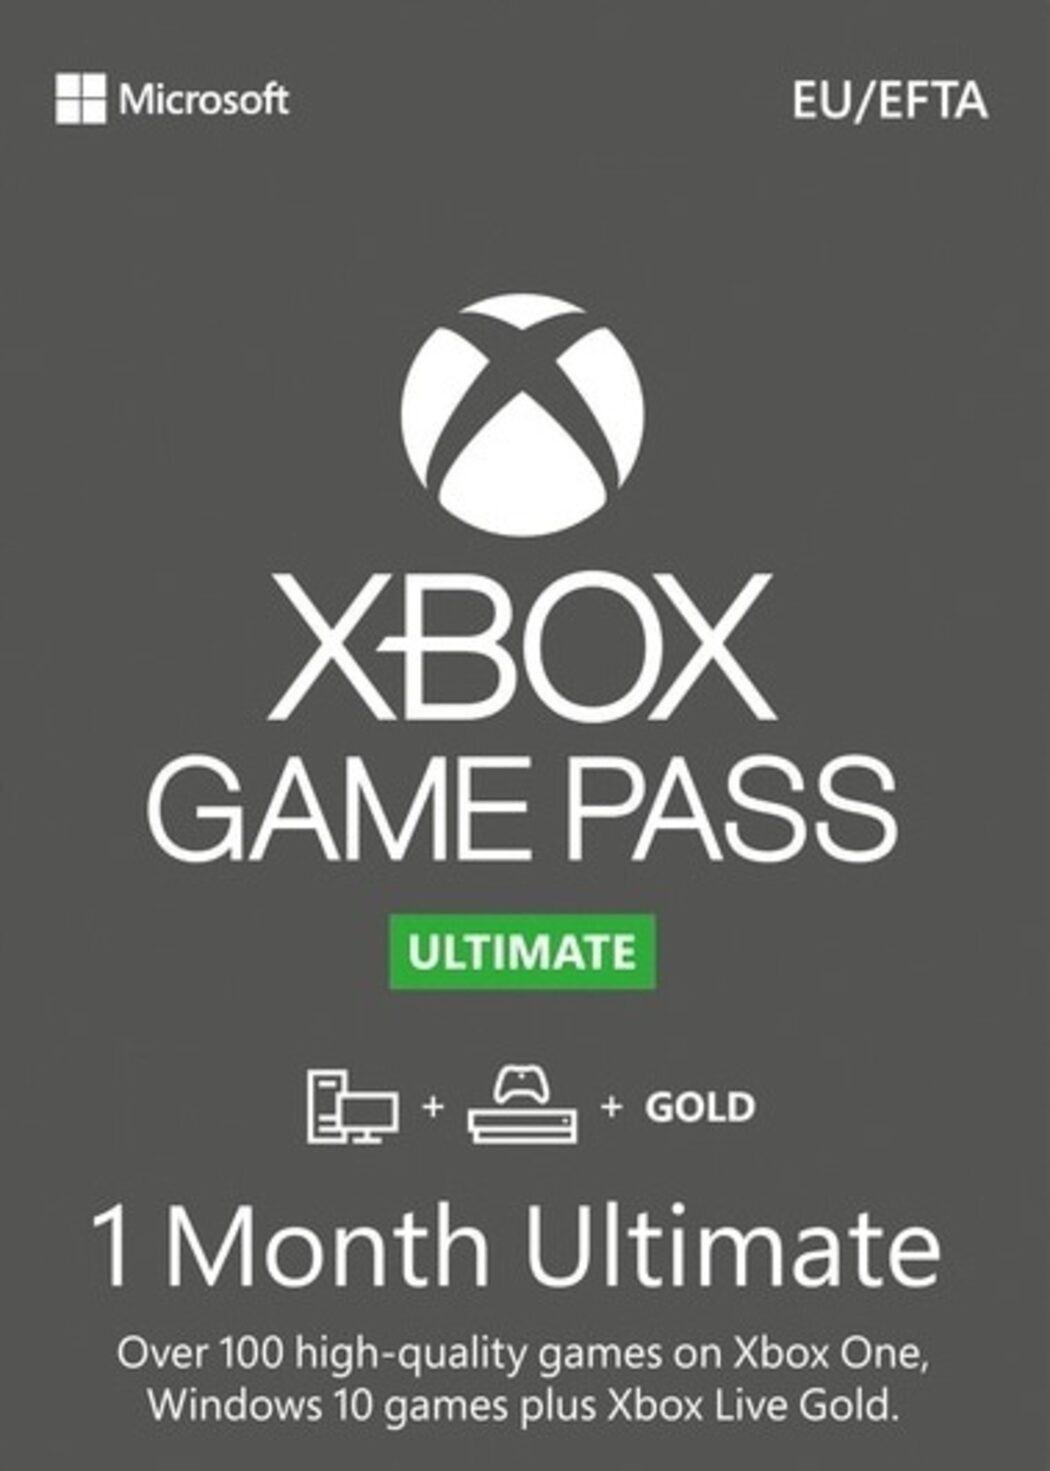 wandelen Vluchtig volleybal Xbox Game Pass Ultimate 1 month TRIAL at a good price | ENEBA